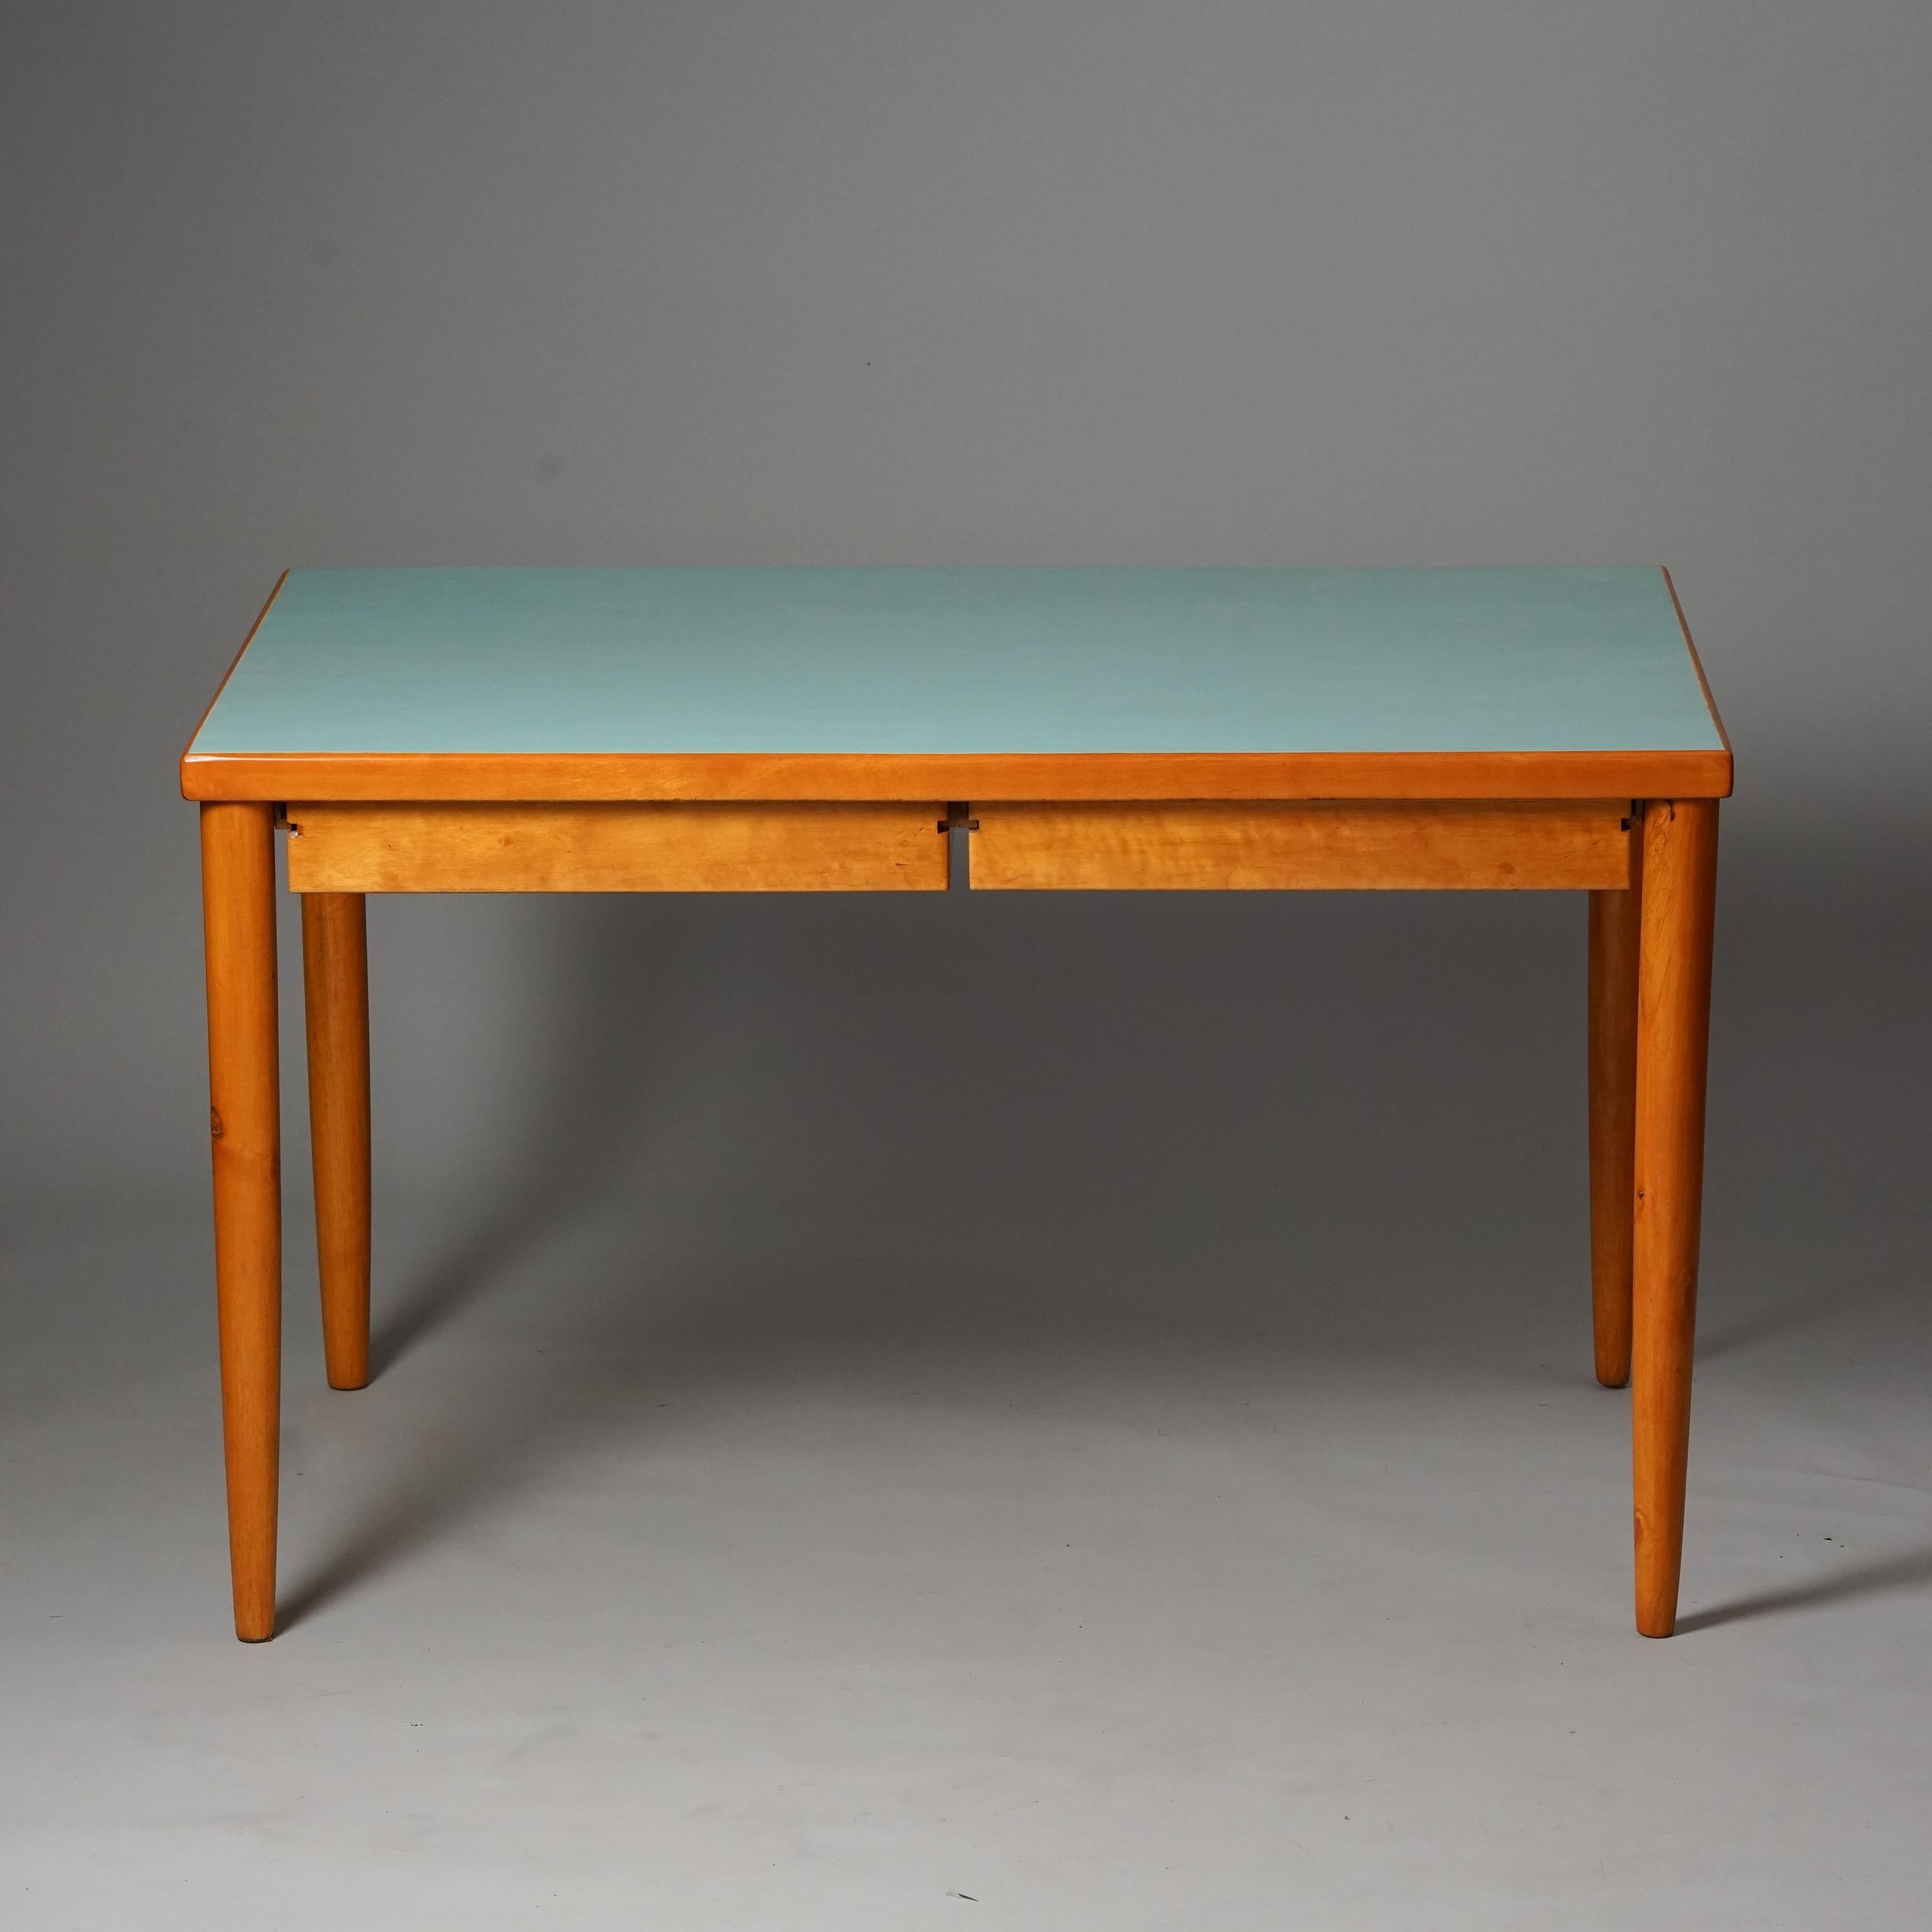 Rare Ilmari Tapiovaara desk, Domus Academica student house, 1940s. Birch with painted table top. Good vintage condition, patina consistent with age and use. Beautiful minimalistic design. Drawers can be used on both sides.

Yrjö Ilmari Tapiovaara